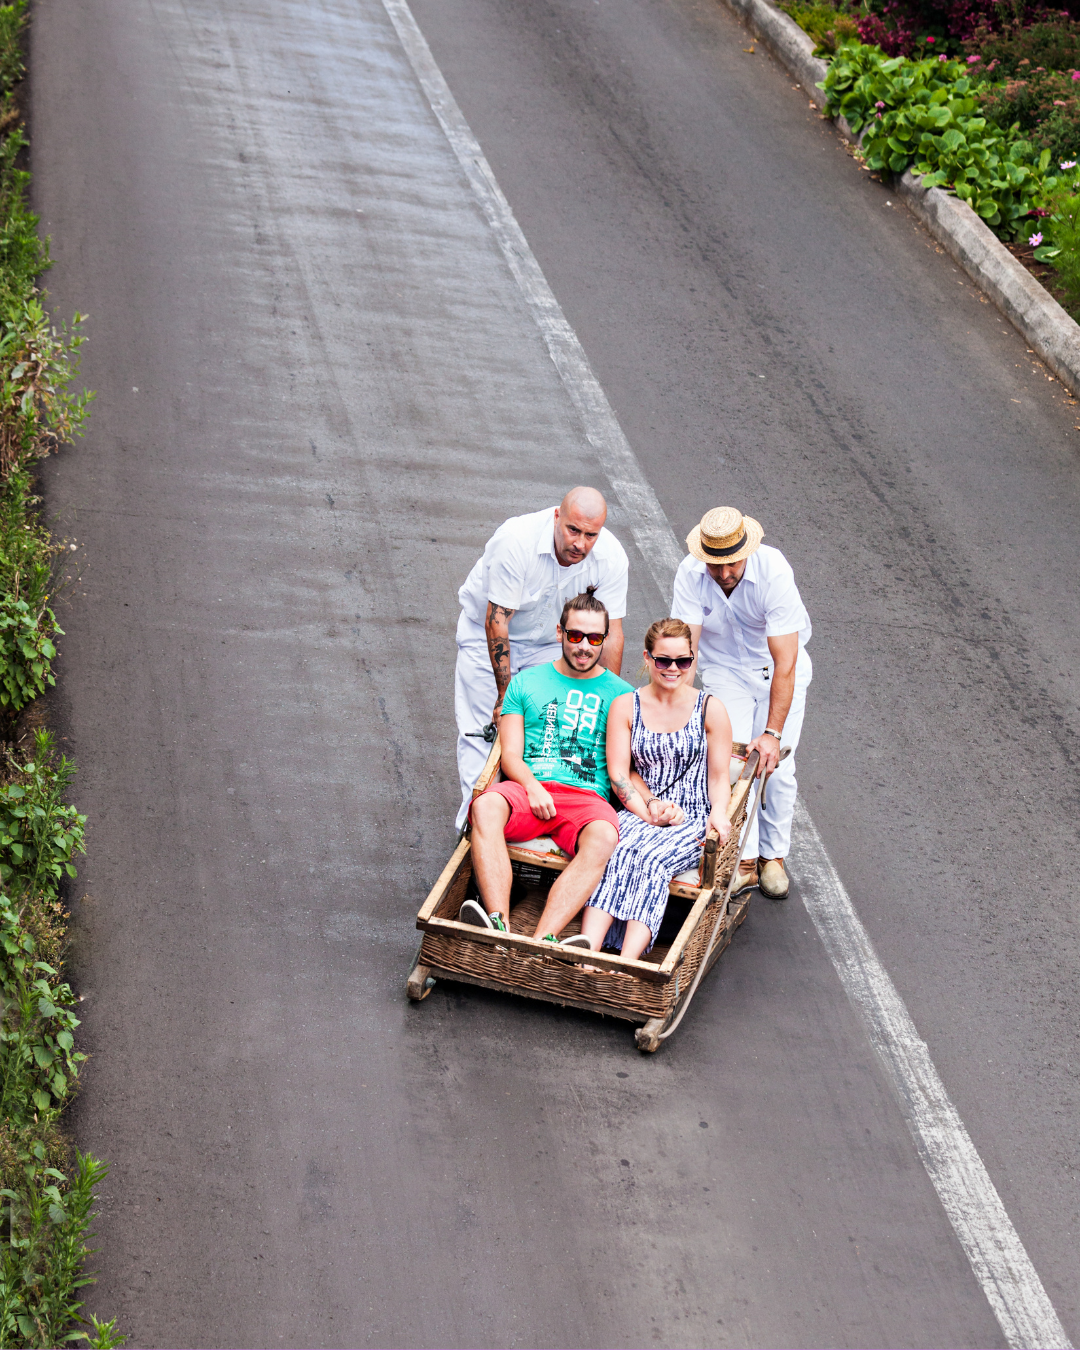 Traditional Downhill Sledge Trip in Madeira, Portugal - Madeira Holidays Barter's Travelnet